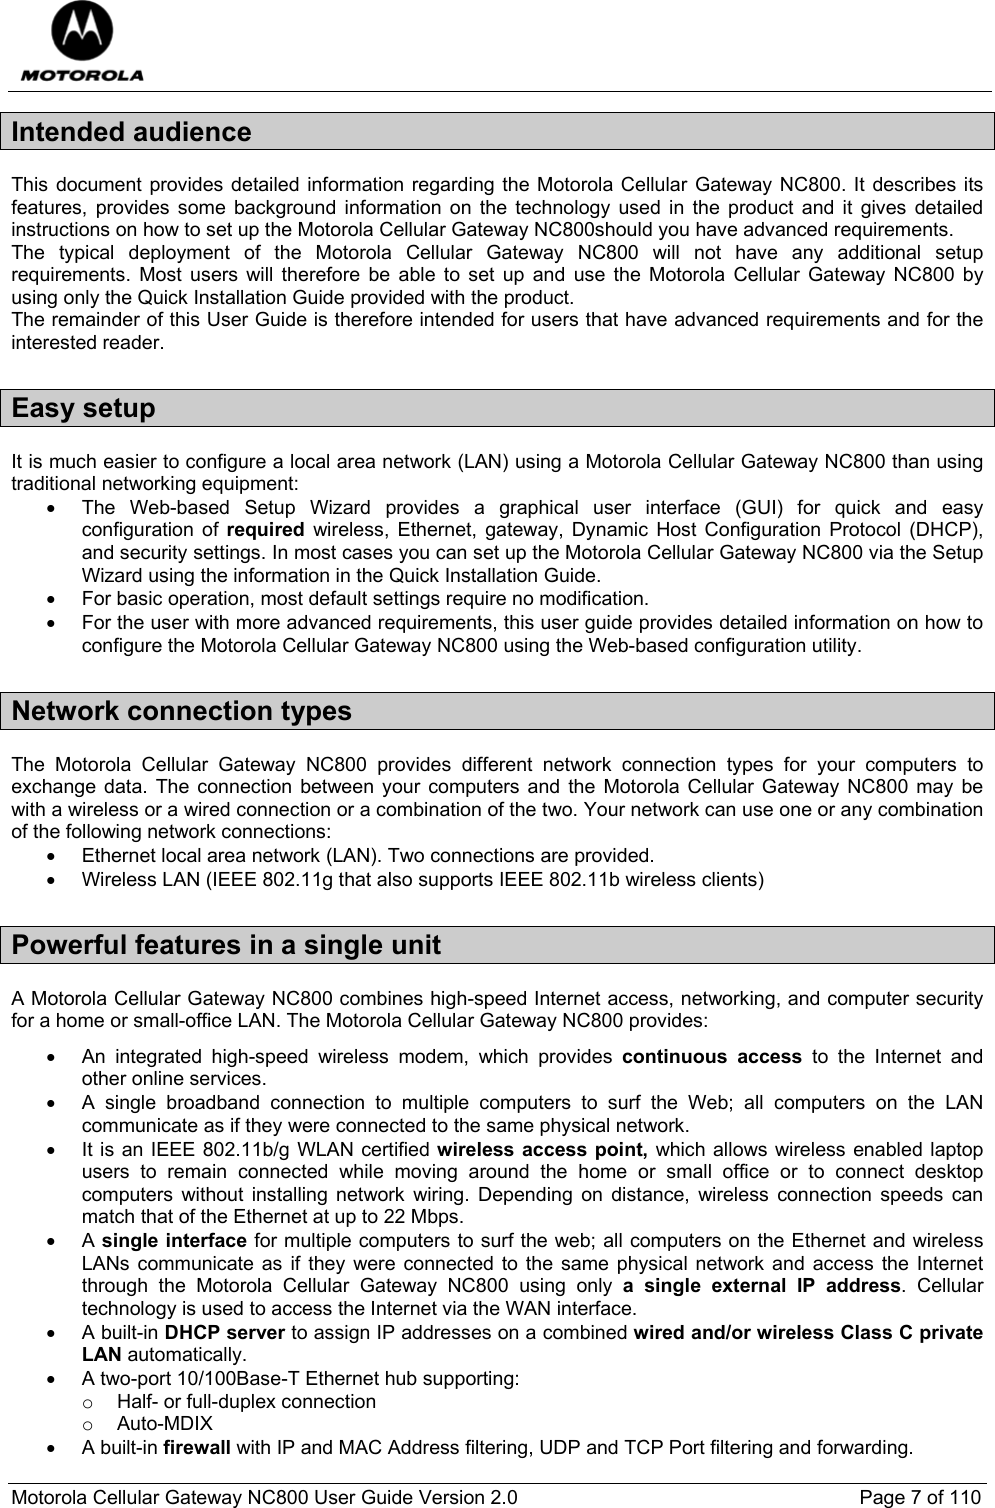  Motorola Cellular Gateway NC800 User Guide Version 2.0     Page 7 of 110  Intended audience This document provides detailed information regarding the Motorola Cellular Gateway NC800. It describes its features, provides some background information on the technology used in the product and it gives detailed instructions on how to set up the Motorola Cellular Gateway NC800should you have advanced requirements. The typical deployment of the Motorola Cellular Gateway NC800 will not have any additional setup requirements. Most users will therefore be able to set up and use the Motorola Cellular Gateway NC800 by using only the Quick Installation Guide provided with the product. The remainder of this User Guide is therefore intended for users that have advanced requirements and for the interested reader. Easy setup It is much easier to configure a local area network (LAN) using a Motorola Cellular Gateway NC800 than using traditional networking equipment: •  The Web-based Setup Wizard provides a graphical user interface (GUI) for quick and easy configuration of required wireless, Ethernet, gateway, Dynamic Host Configuration Protocol (DHCP), and security settings. In most cases you can set up the Motorola Cellular Gateway NC800 via the Setup Wizard using the information in the Quick Installation Guide. •  For basic operation, most default settings require no modification. •  For the user with more advanced requirements, this user guide provides detailed information on how to configure the Motorola Cellular Gateway NC800 using the Web-based configuration utility. Network connection types The Motorola Cellular Gateway NC800 provides different network connection types for your computers to exchange data. The connection between your computers and the Motorola Cellular Gateway NC800 may be with a wireless or a wired connection or a combination of the two. Your network can use one or any combination of the following network connections: •  Ethernet local area network (LAN). Two connections are provided. •  Wireless LAN (IEEE 802.11g that also supports IEEE 802.11b wireless clients) Powerful features in a single unit A Motorola Cellular Gateway NC800 combines high-speed Internet access, networking, and computer security for a home or small-office LAN. The Motorola Cellular Gateway NC800 provides: •  An integrated high-speed wireless modem, which provides continuous access to the Internet and other online services. •  A single broadband connection to multiple computers to surf the Web; all computers on the LAN communicate as if they were connected to the same physical network. •  It is an IEEE 802.11b/g WLAN certified wireless access point, which allows wireless enabled laptop users to remain connected while moving around the home or small office or to connect desktop computers without installing network wiring. Depending on distance, wireless connection speeds can match that of the Ethernet at up to 22 Mbps. • A single interface for multiple computers to surf the web; all computers on the Ethernet and wireless LANs communicate as if they were connected to the same physical network and access the Internet through the Motorola Cellular Gateway NC800 using only a single external IP address. Cellular technology is used to access the Internet via the WAN interface. • A built-in DHCP server to assign IP addresses on a combined wired and/or wireless Class C private LAN automatically. •  A two-port 10/100Base-T Ethernet hub supporting: o  Half- or full-duplex connection o Auto-MDIX • A built-in firewall with IP and MAC Address filtering, UDP and TCP Port filtering and forwarding. 